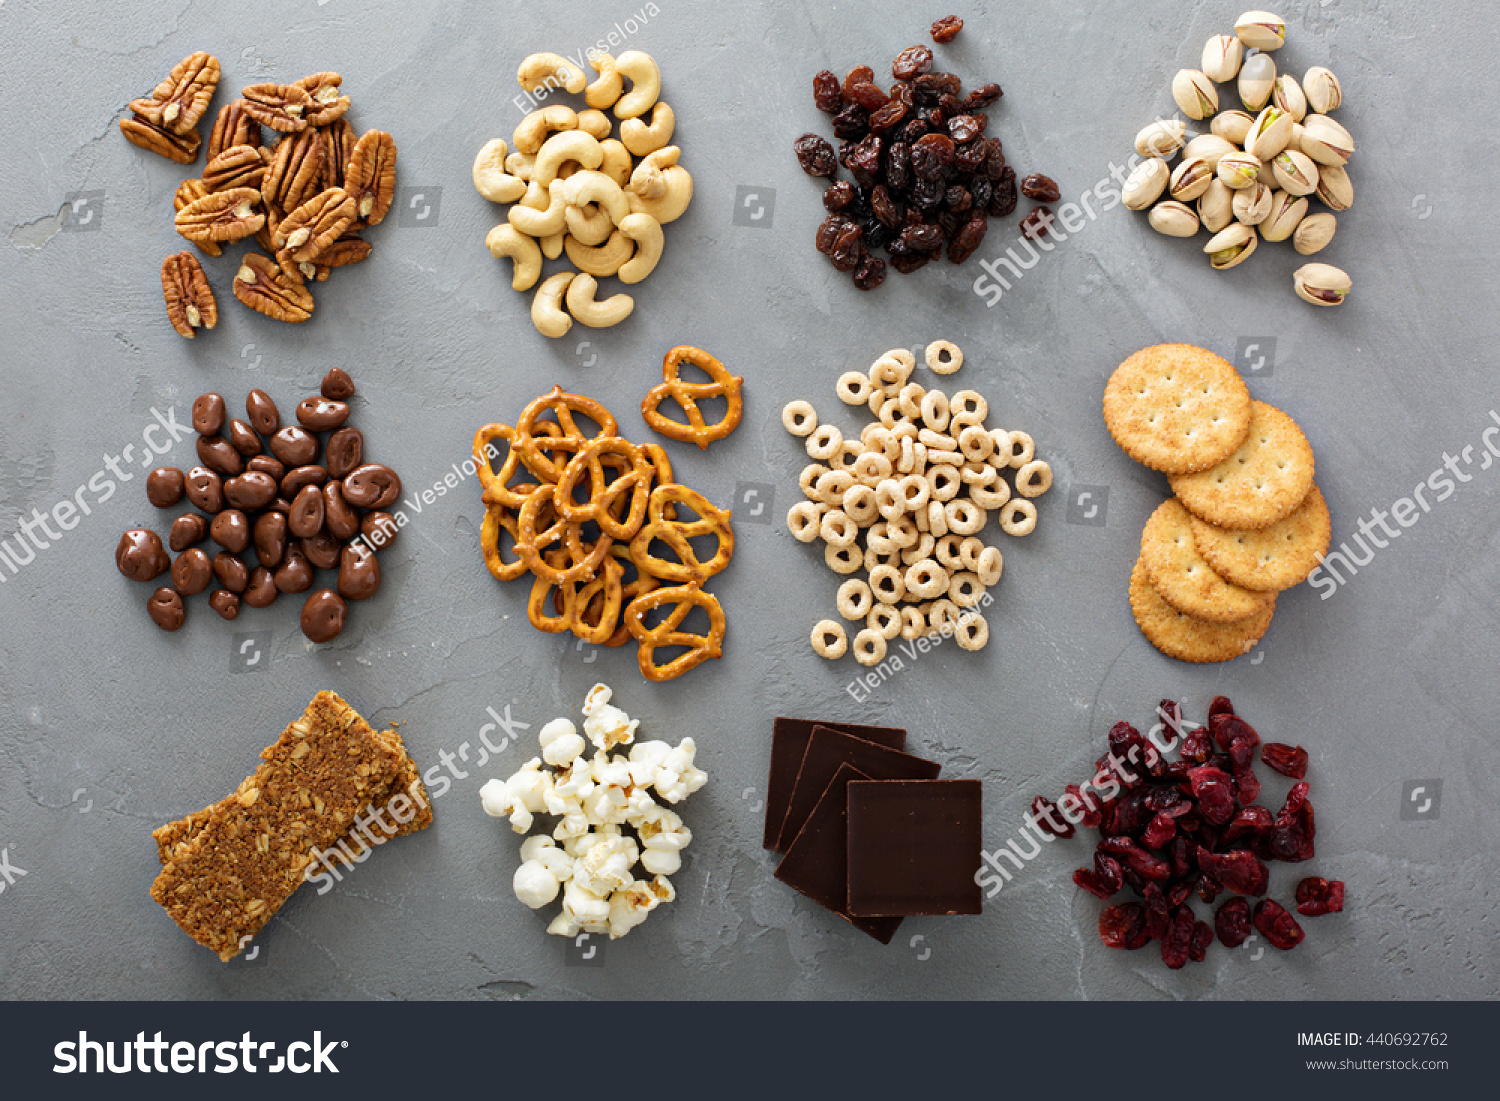 Variety of healthy snacks overhead shot laying on the table #440692762